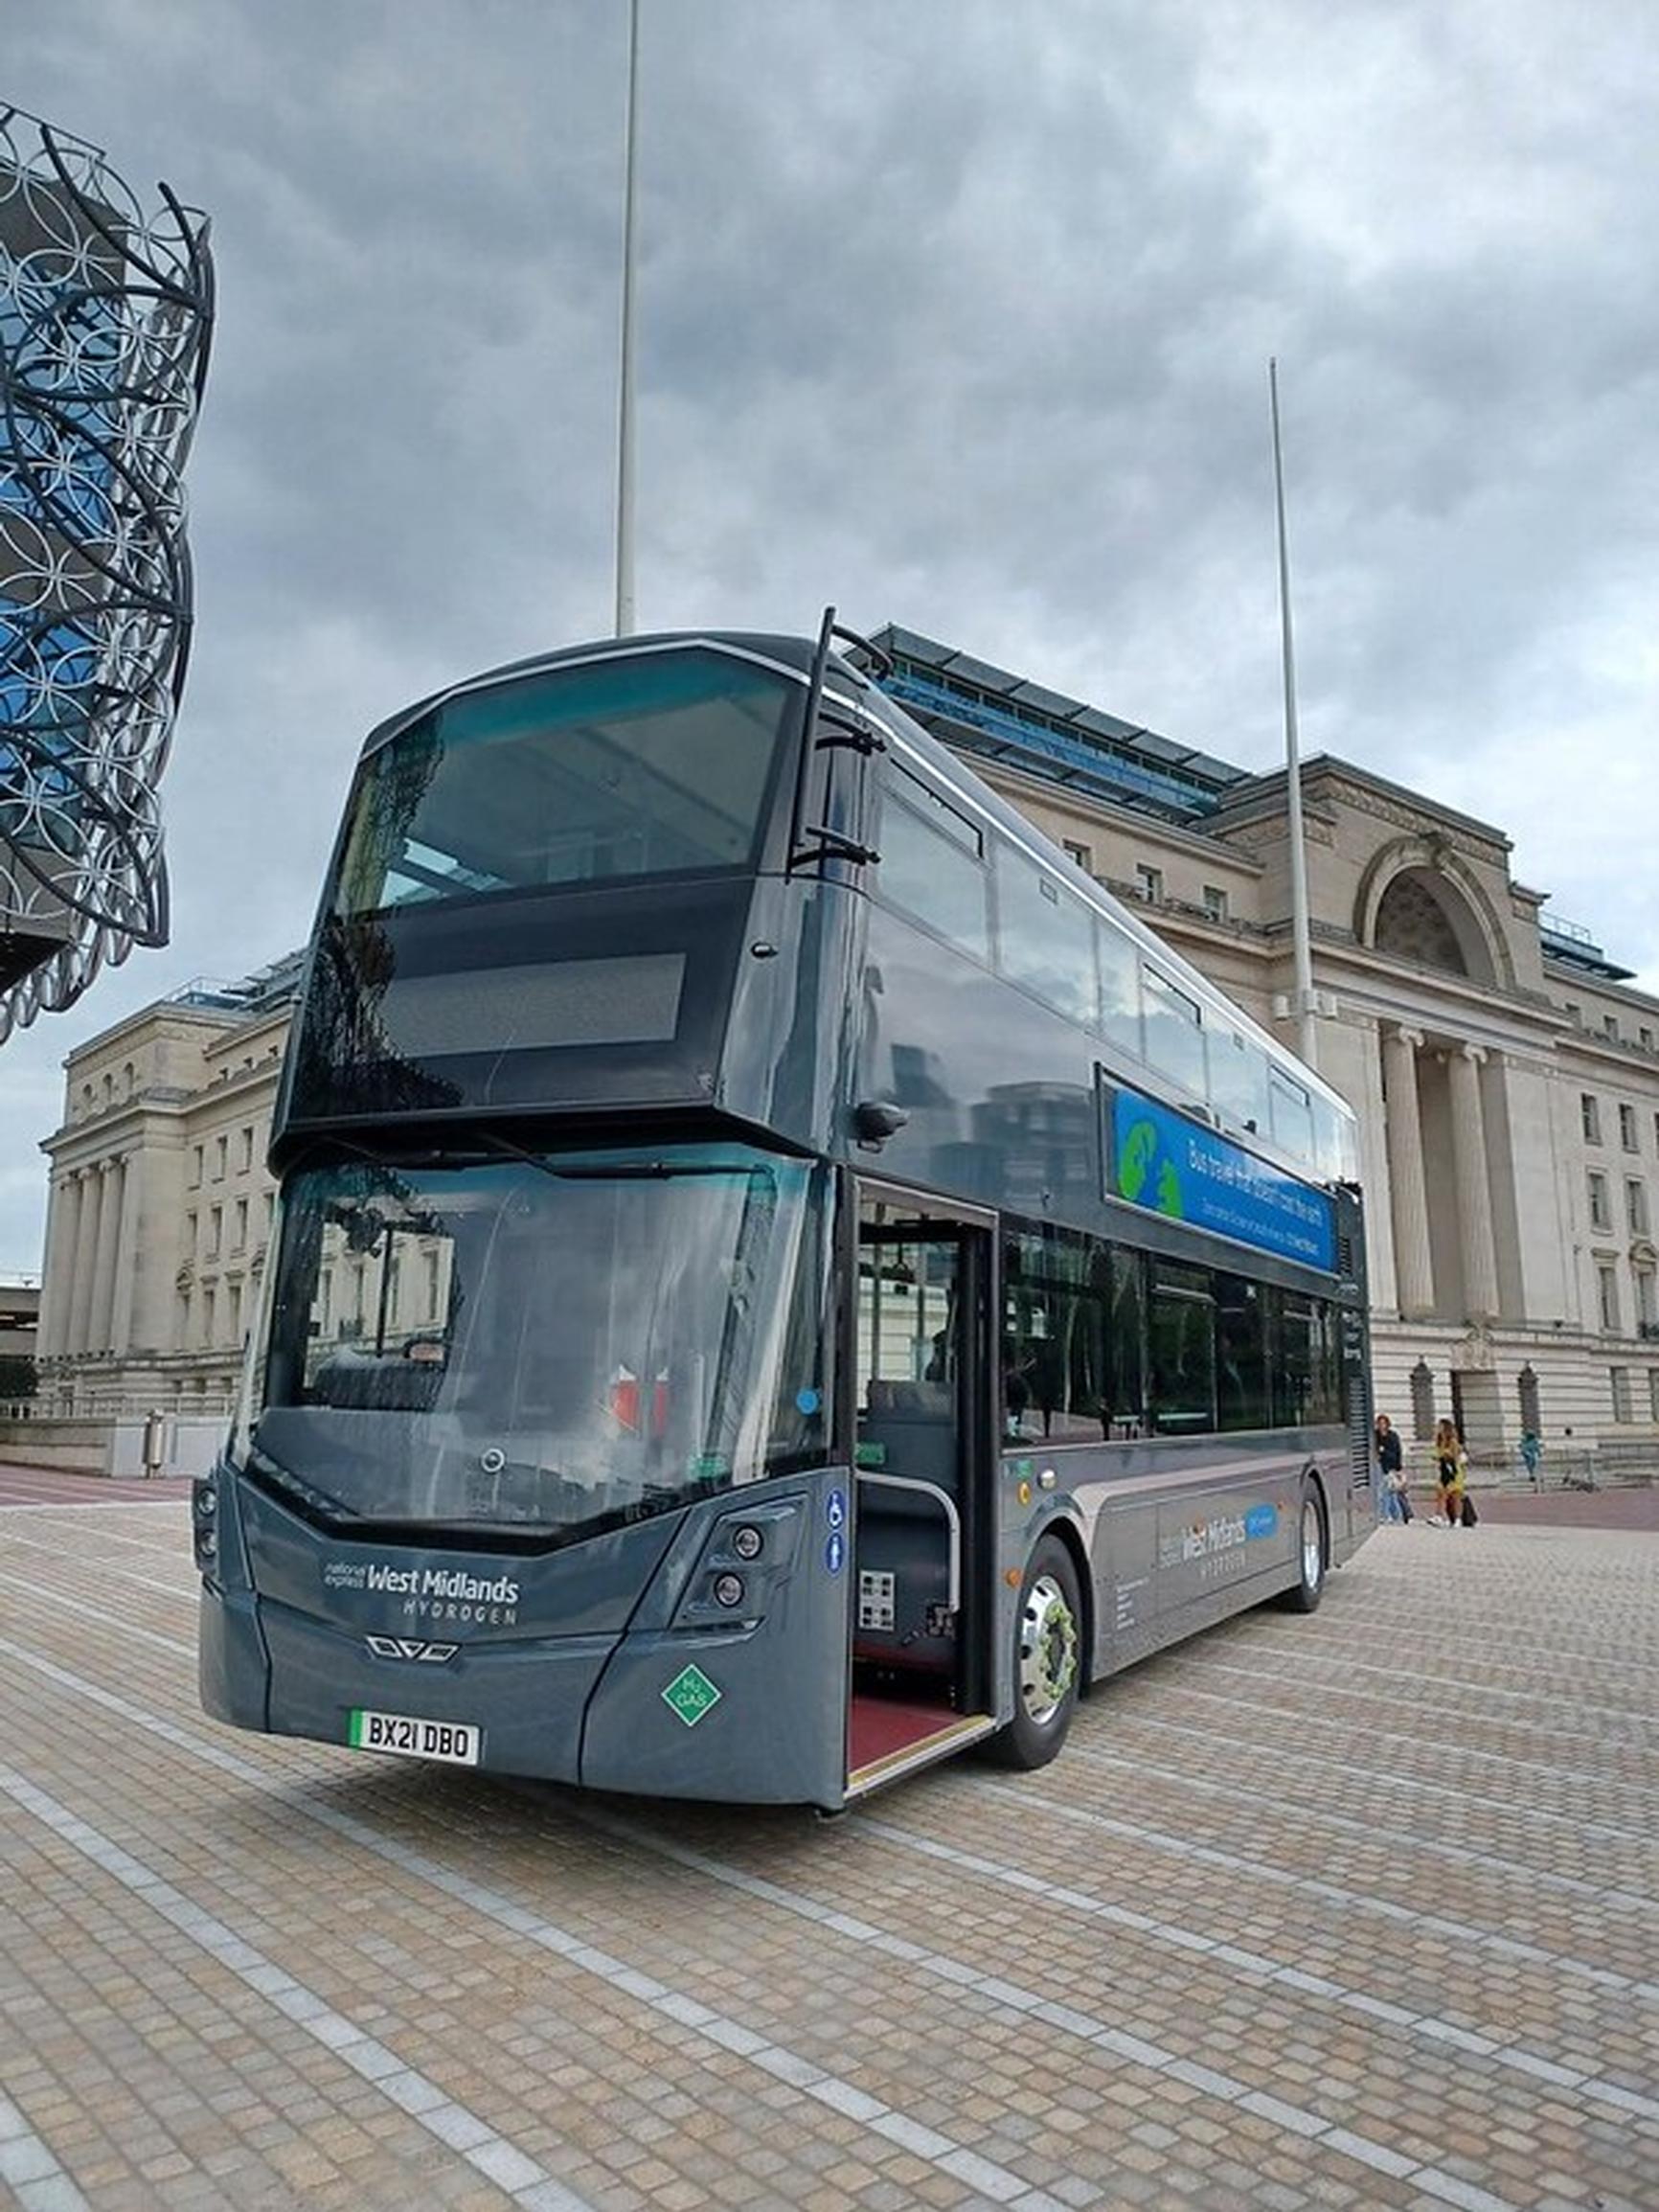 Trial of hydrogen fleet launched on
Birmingham’s bus rapid transit route